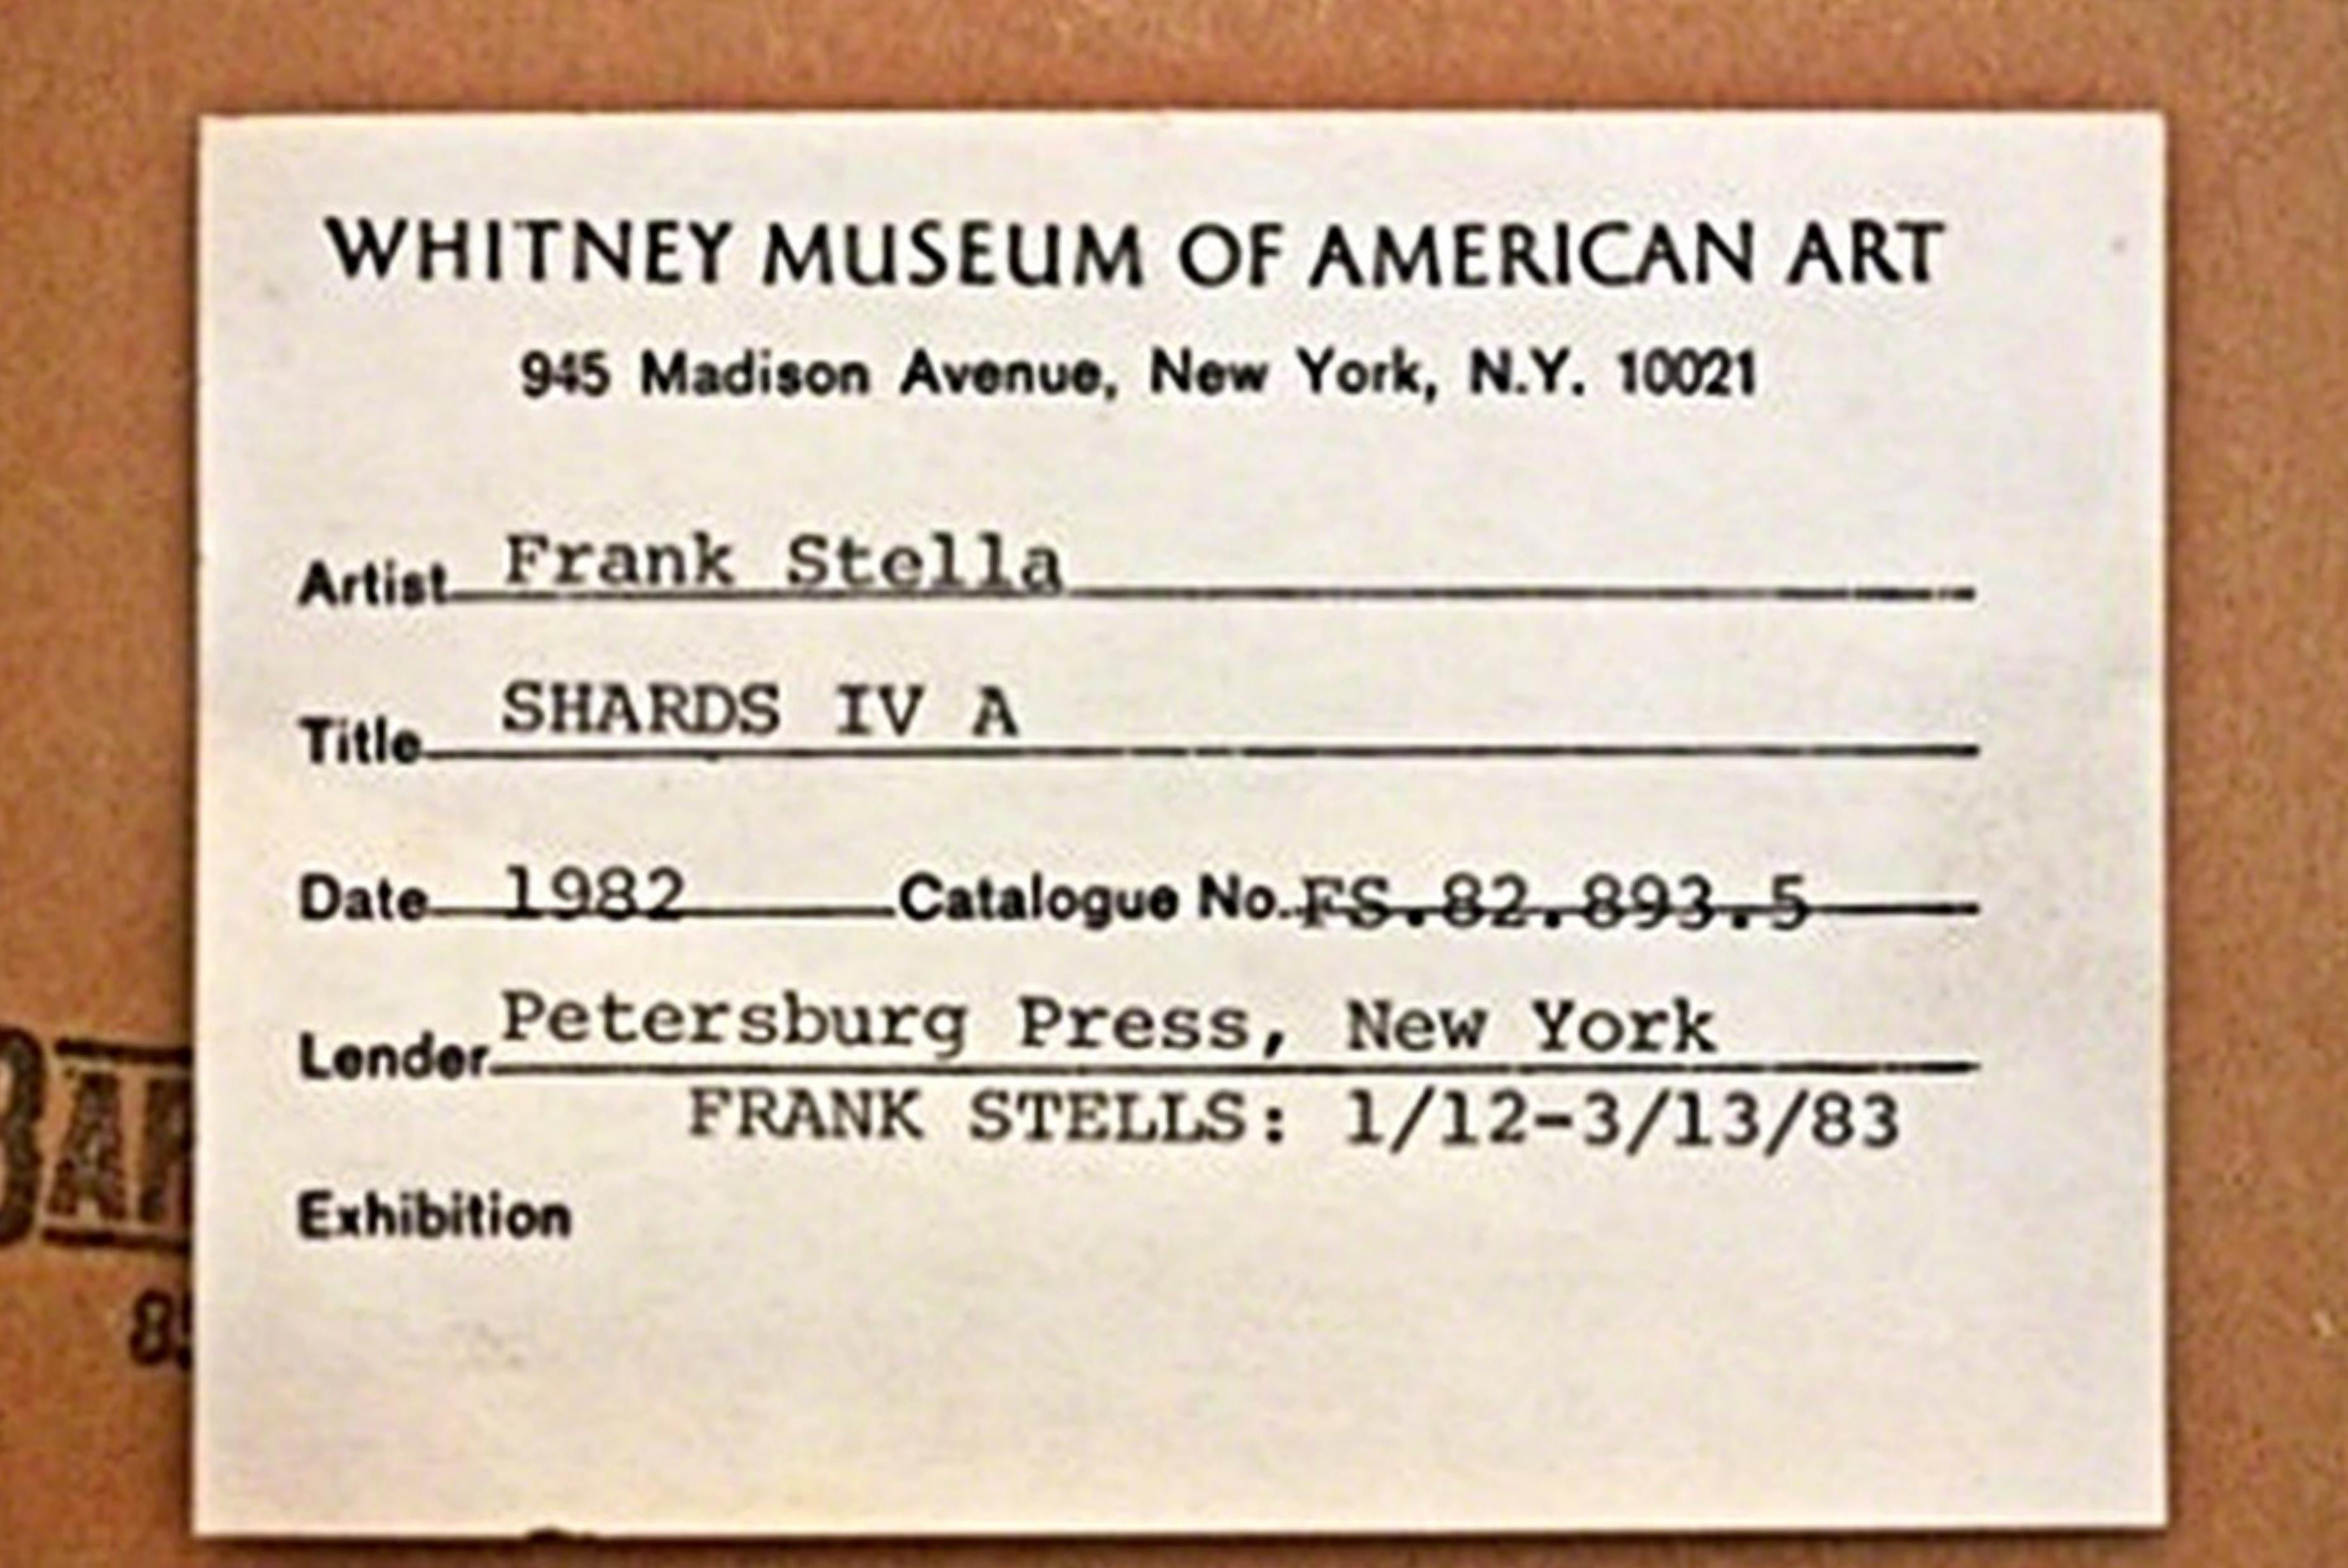 Frank Stella
(Whitney Museum Exhibited) Shards IVA (Axsom 151), 1982
Lithograph & Silkscreen on Arches Cover Paper (Whitney Museum exhibition label verso of frame)
45 1/2 × 39 1/4 inches
Edition 40/49
Signed on the front and numbered from the